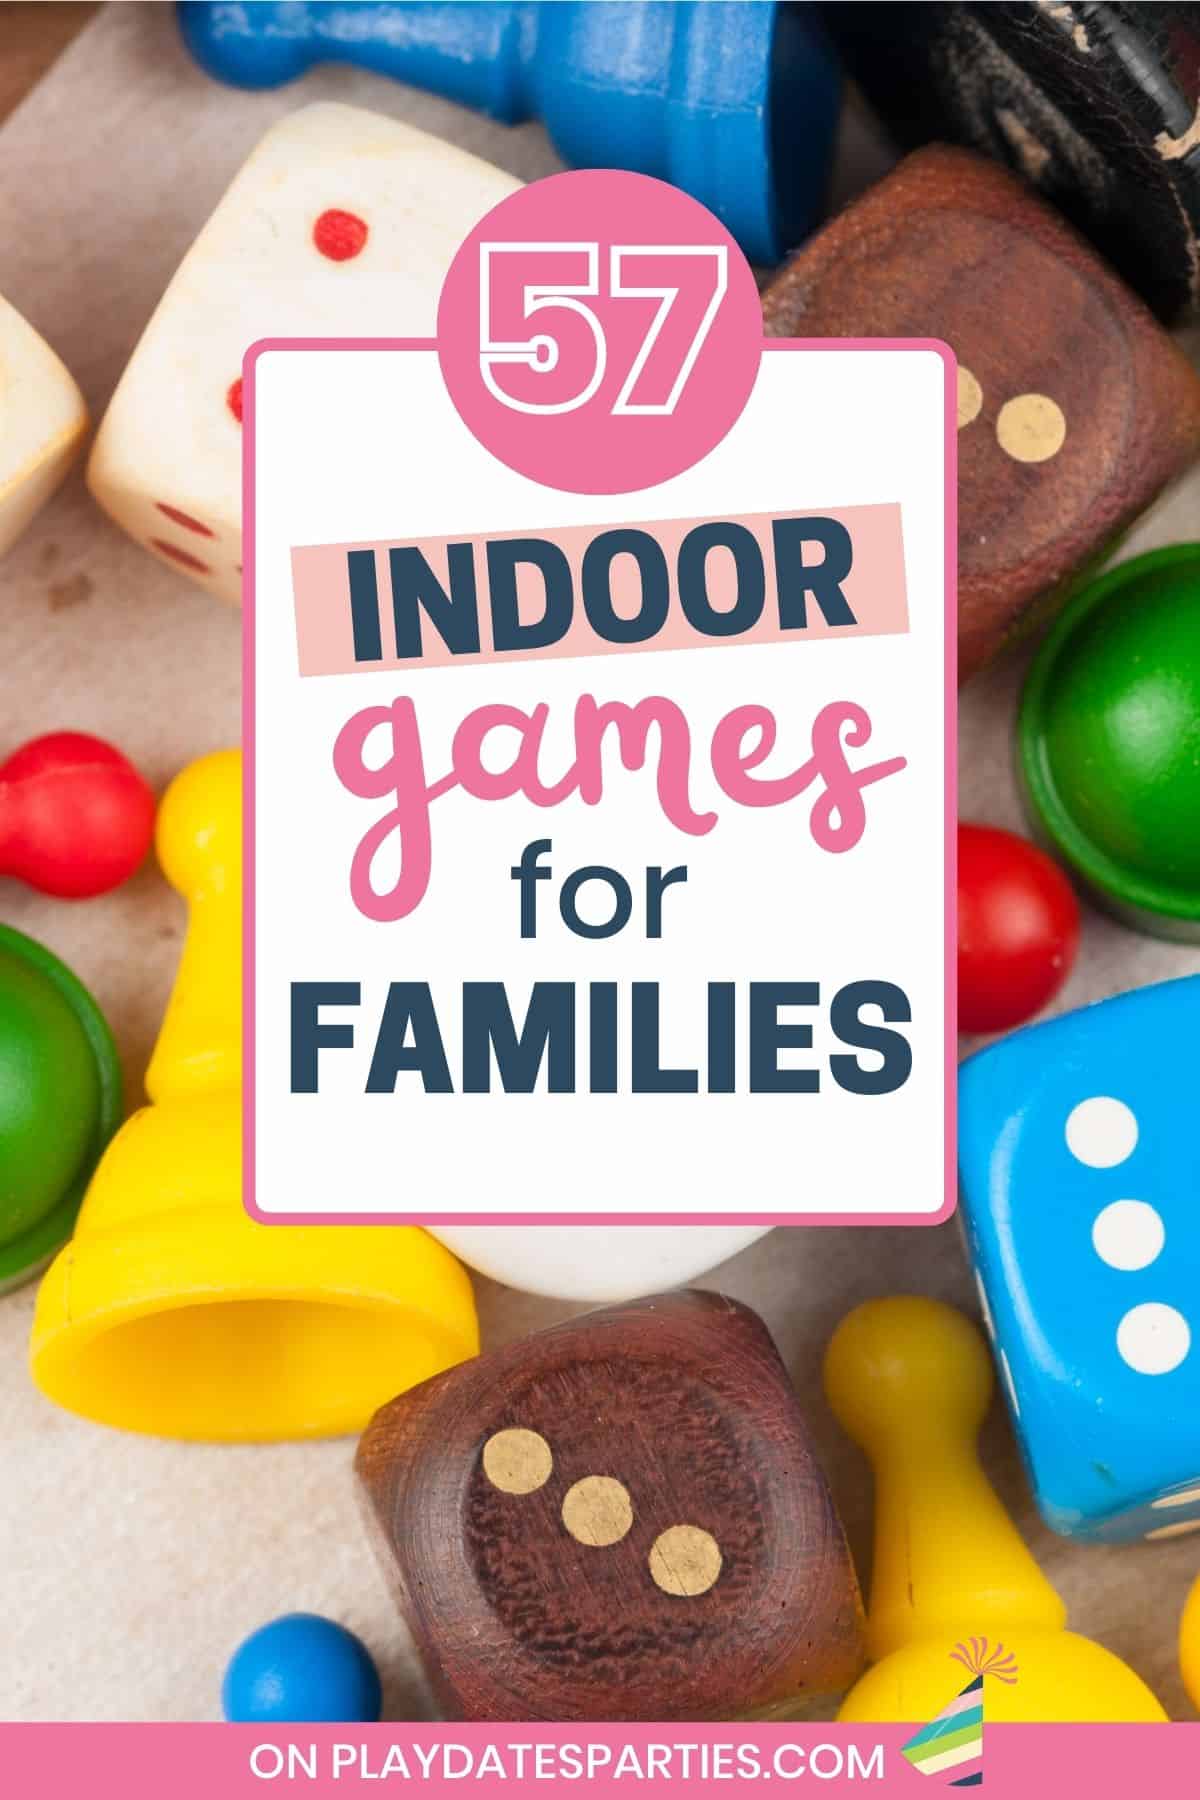 Scattered dice and game pieces with text overlay 57 indoor games for families.